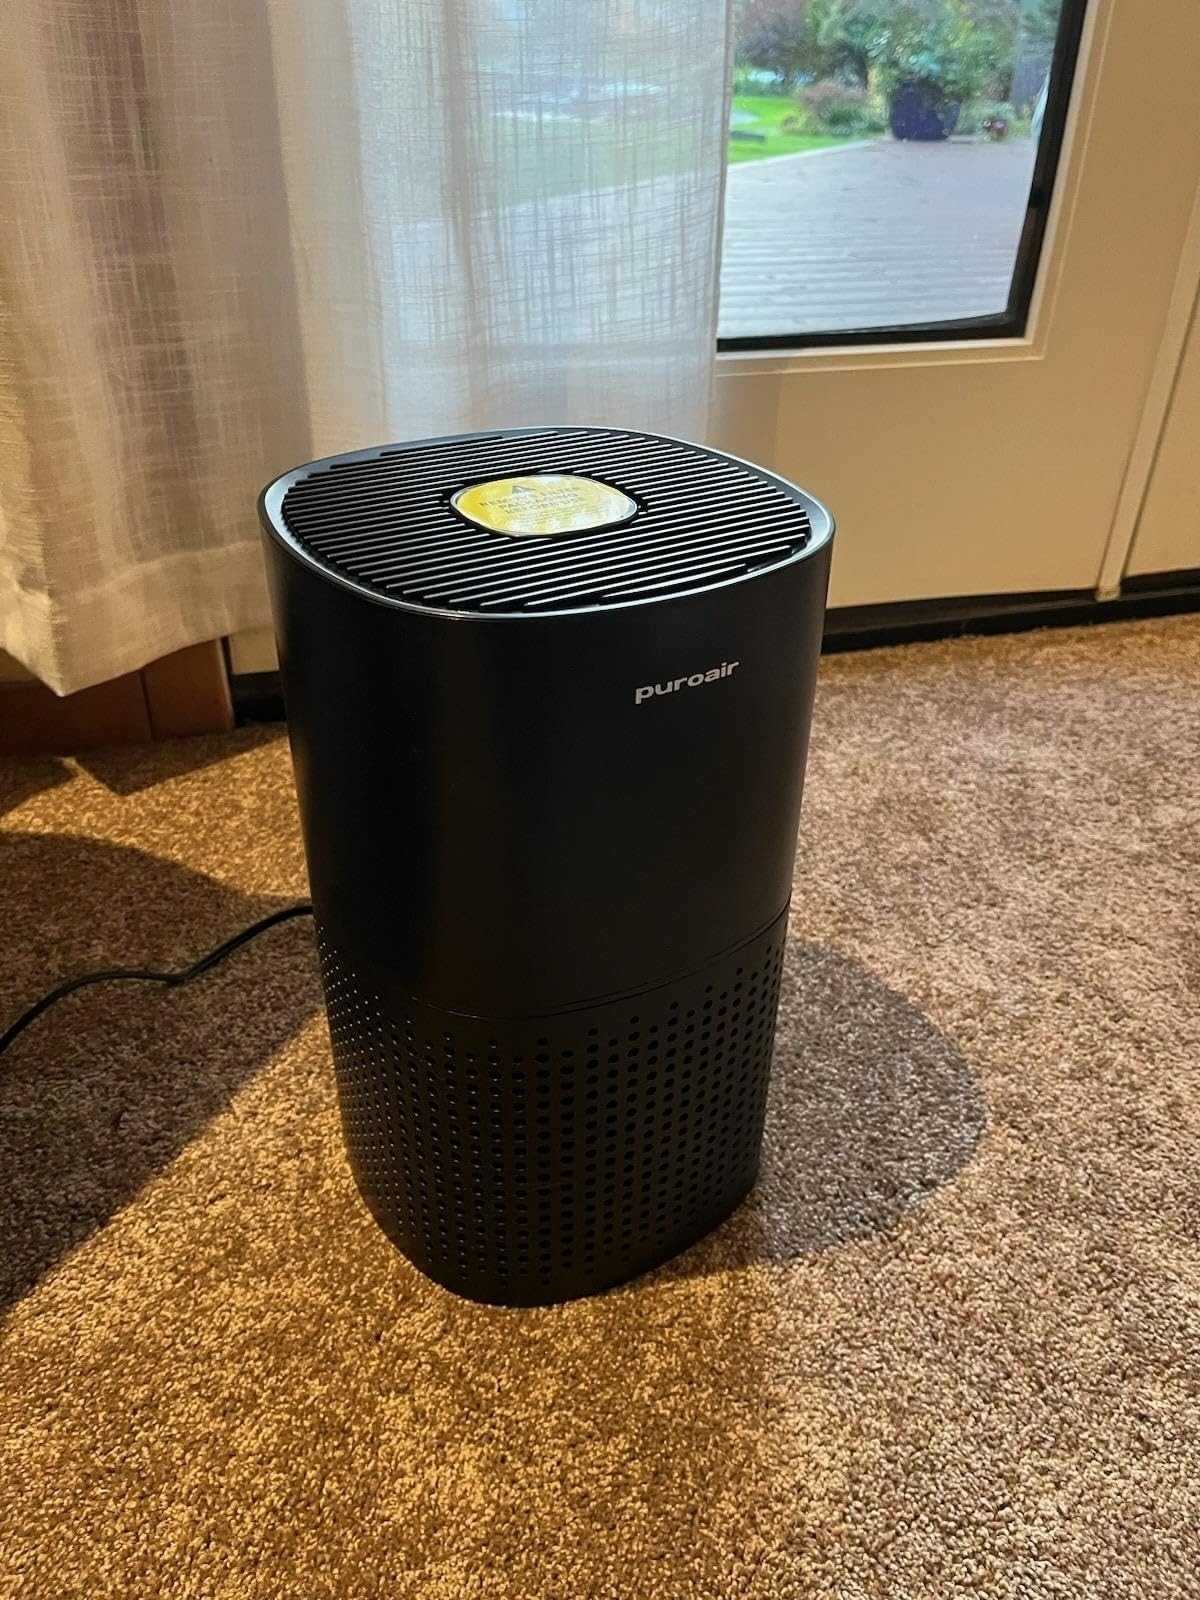 Black air purifier standing on carpet near a window with sheer curtains